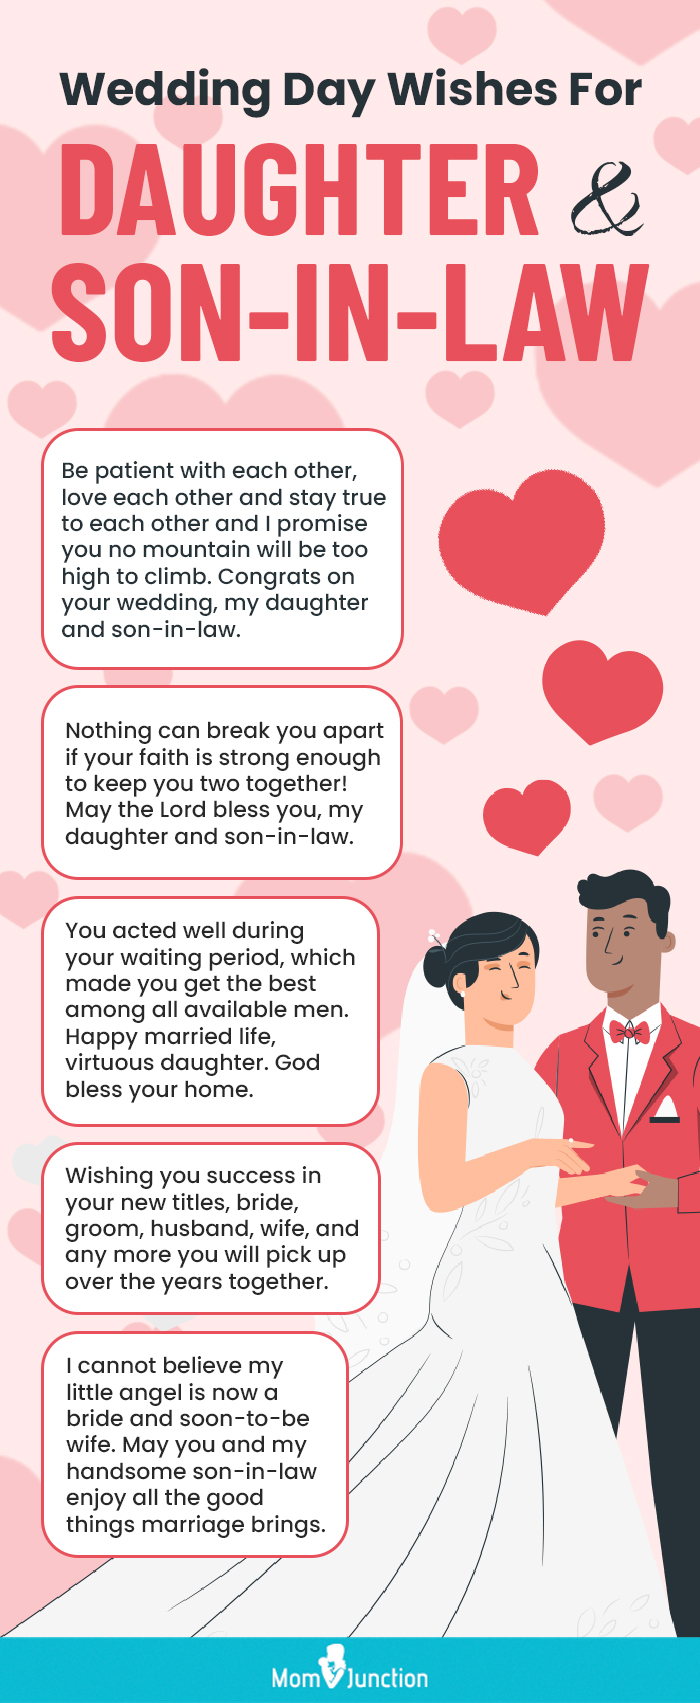 55+ Wedding Day Wishes For Daughter And Son-In-Law